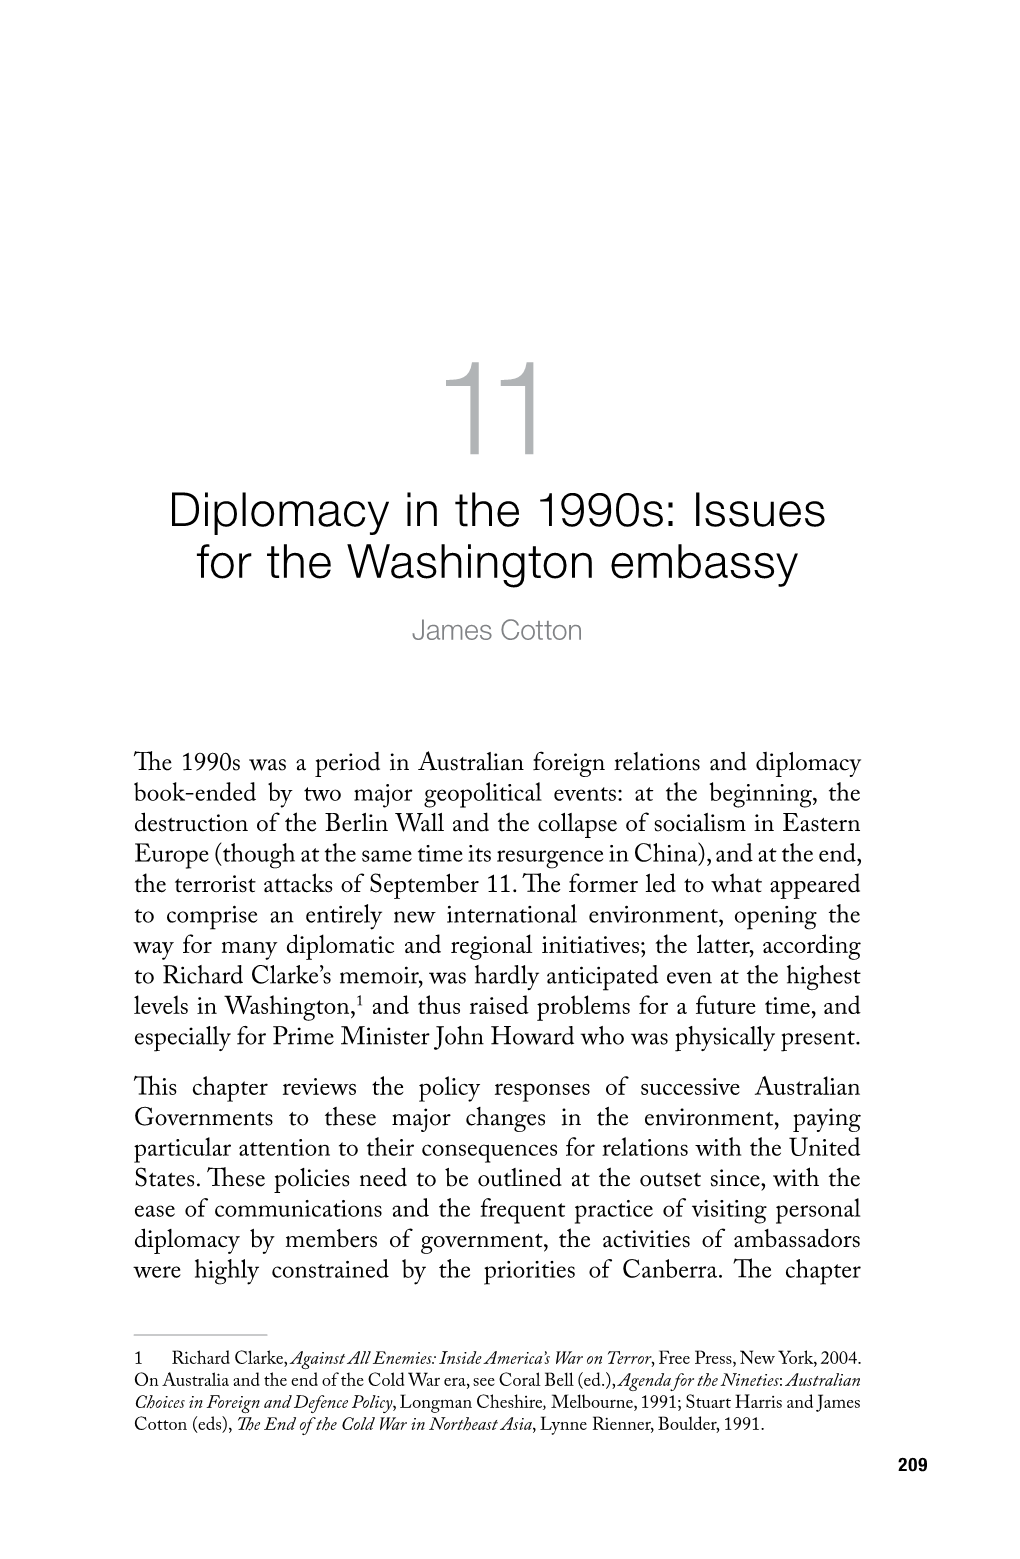 Diplomacy in the 1990S: Issues for the Washington Embassy James Cotton